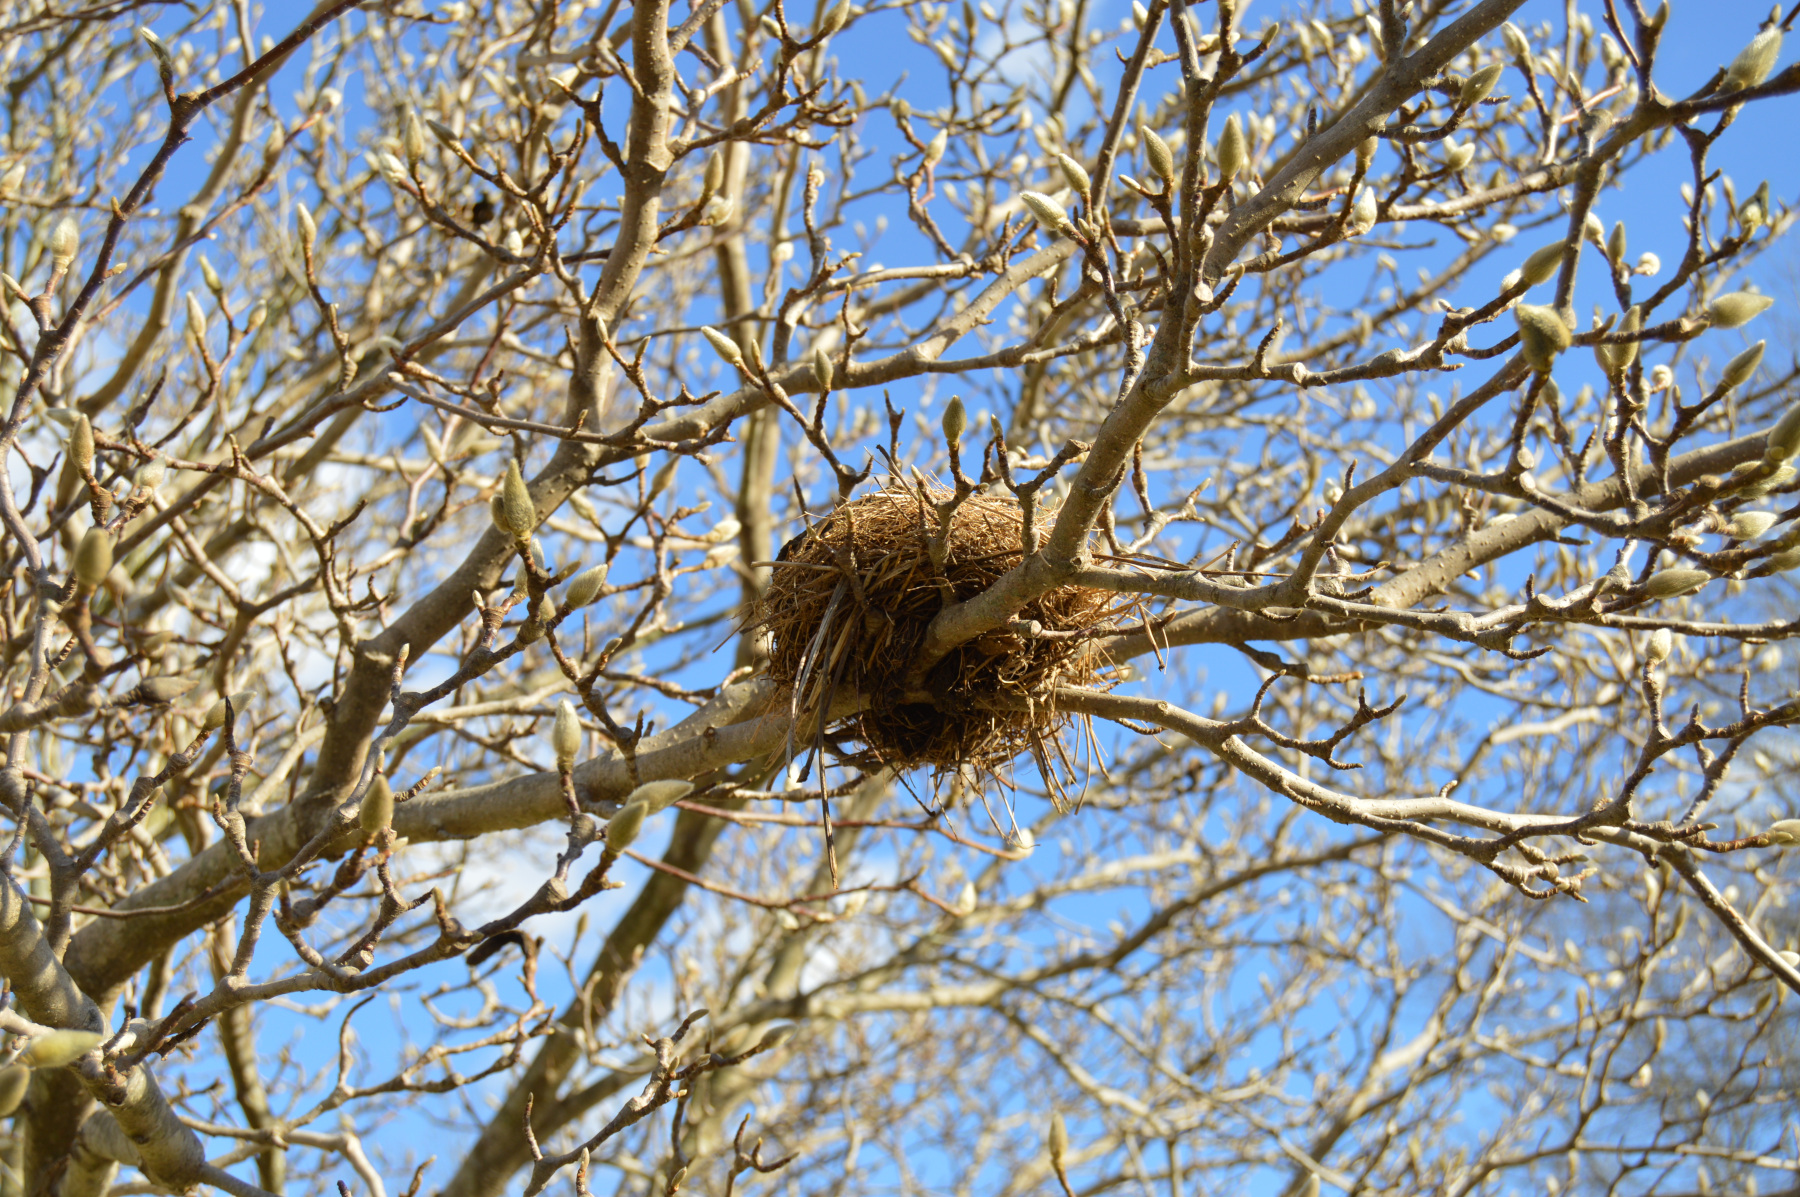 One of the first photos with my DSLR, a bird's nest, 2014-12-25